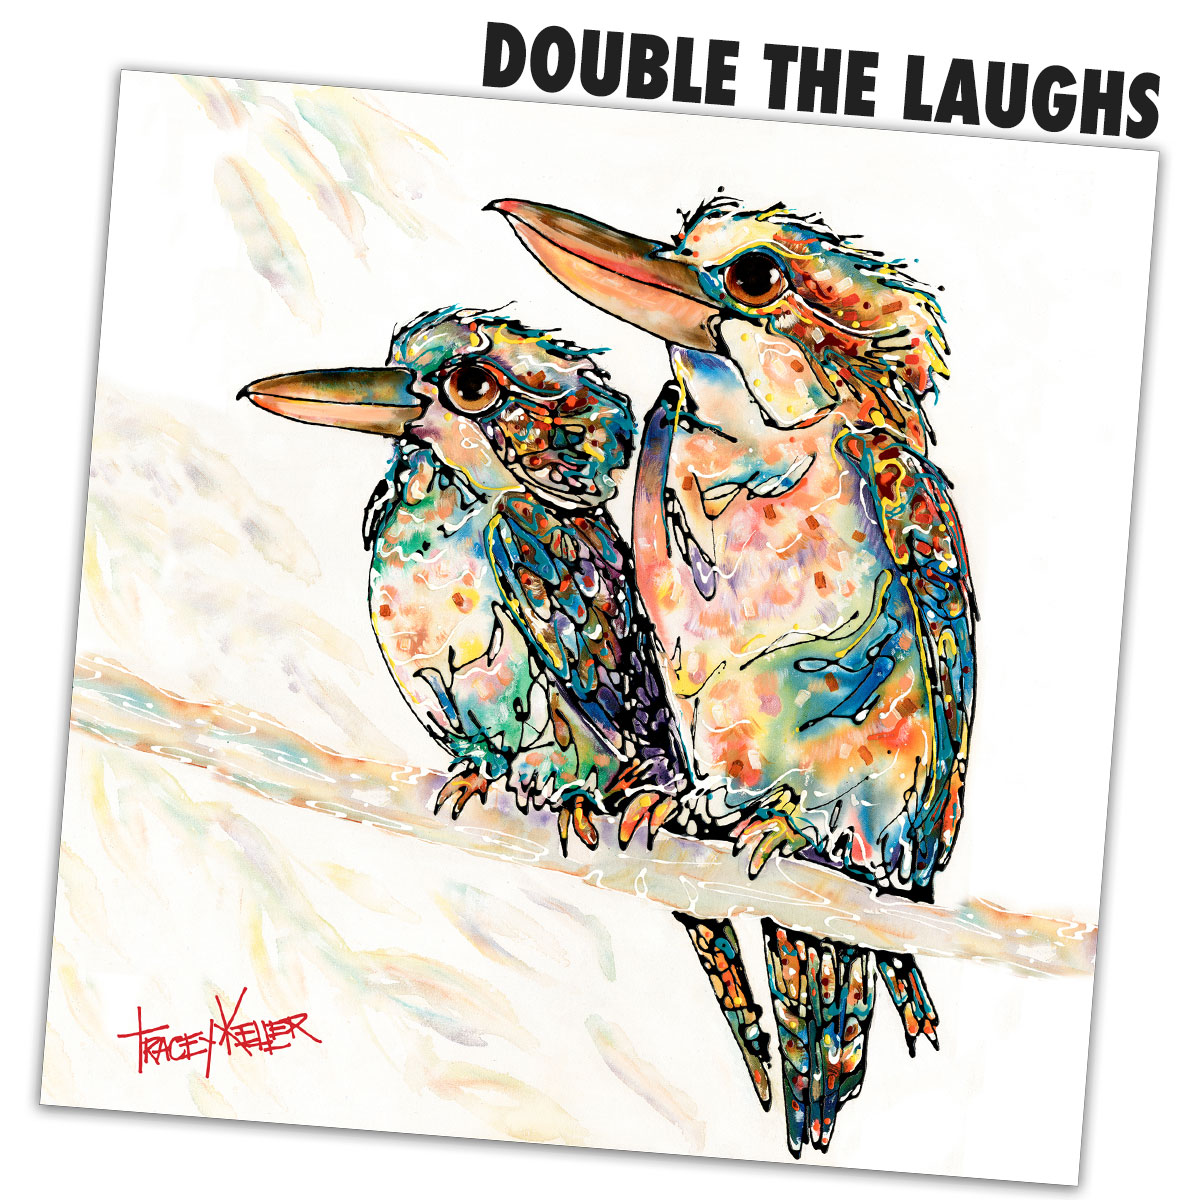 DOUBLE THE LAUGHS